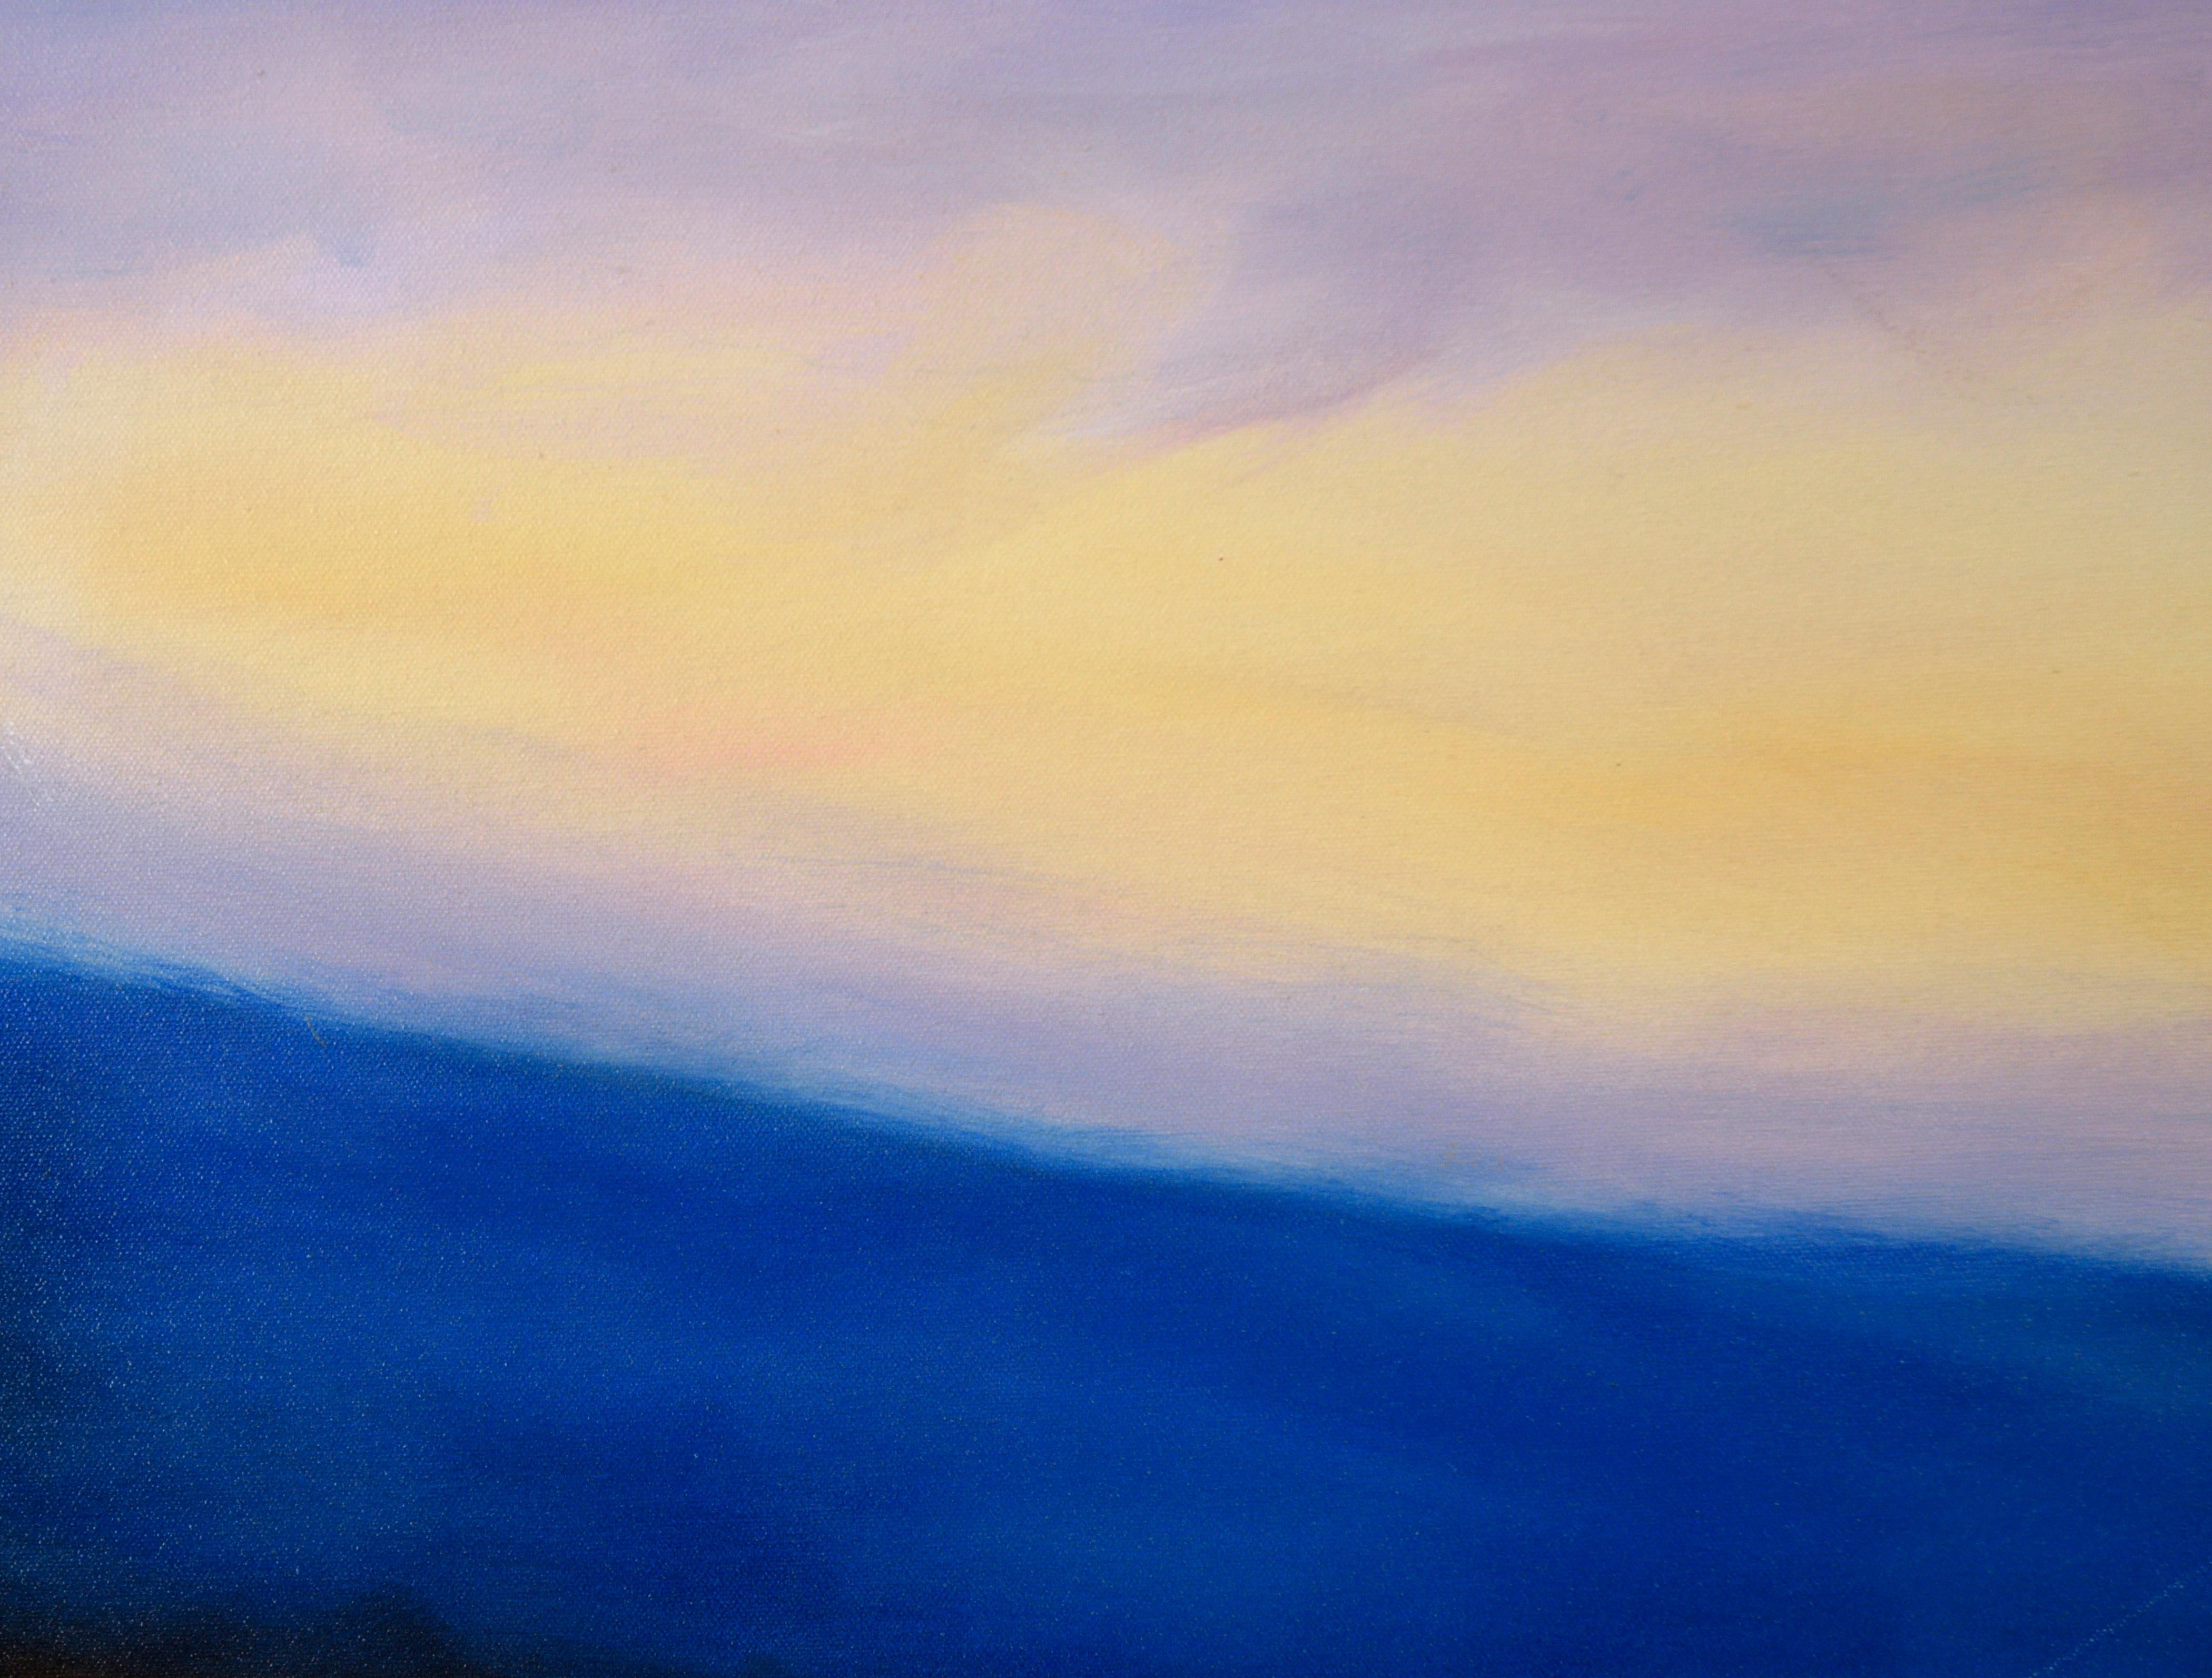 Hazy Sunrise over Blue Mountains - Landscape in Oil on Canvas - Painting by Kelly Cool Lucas